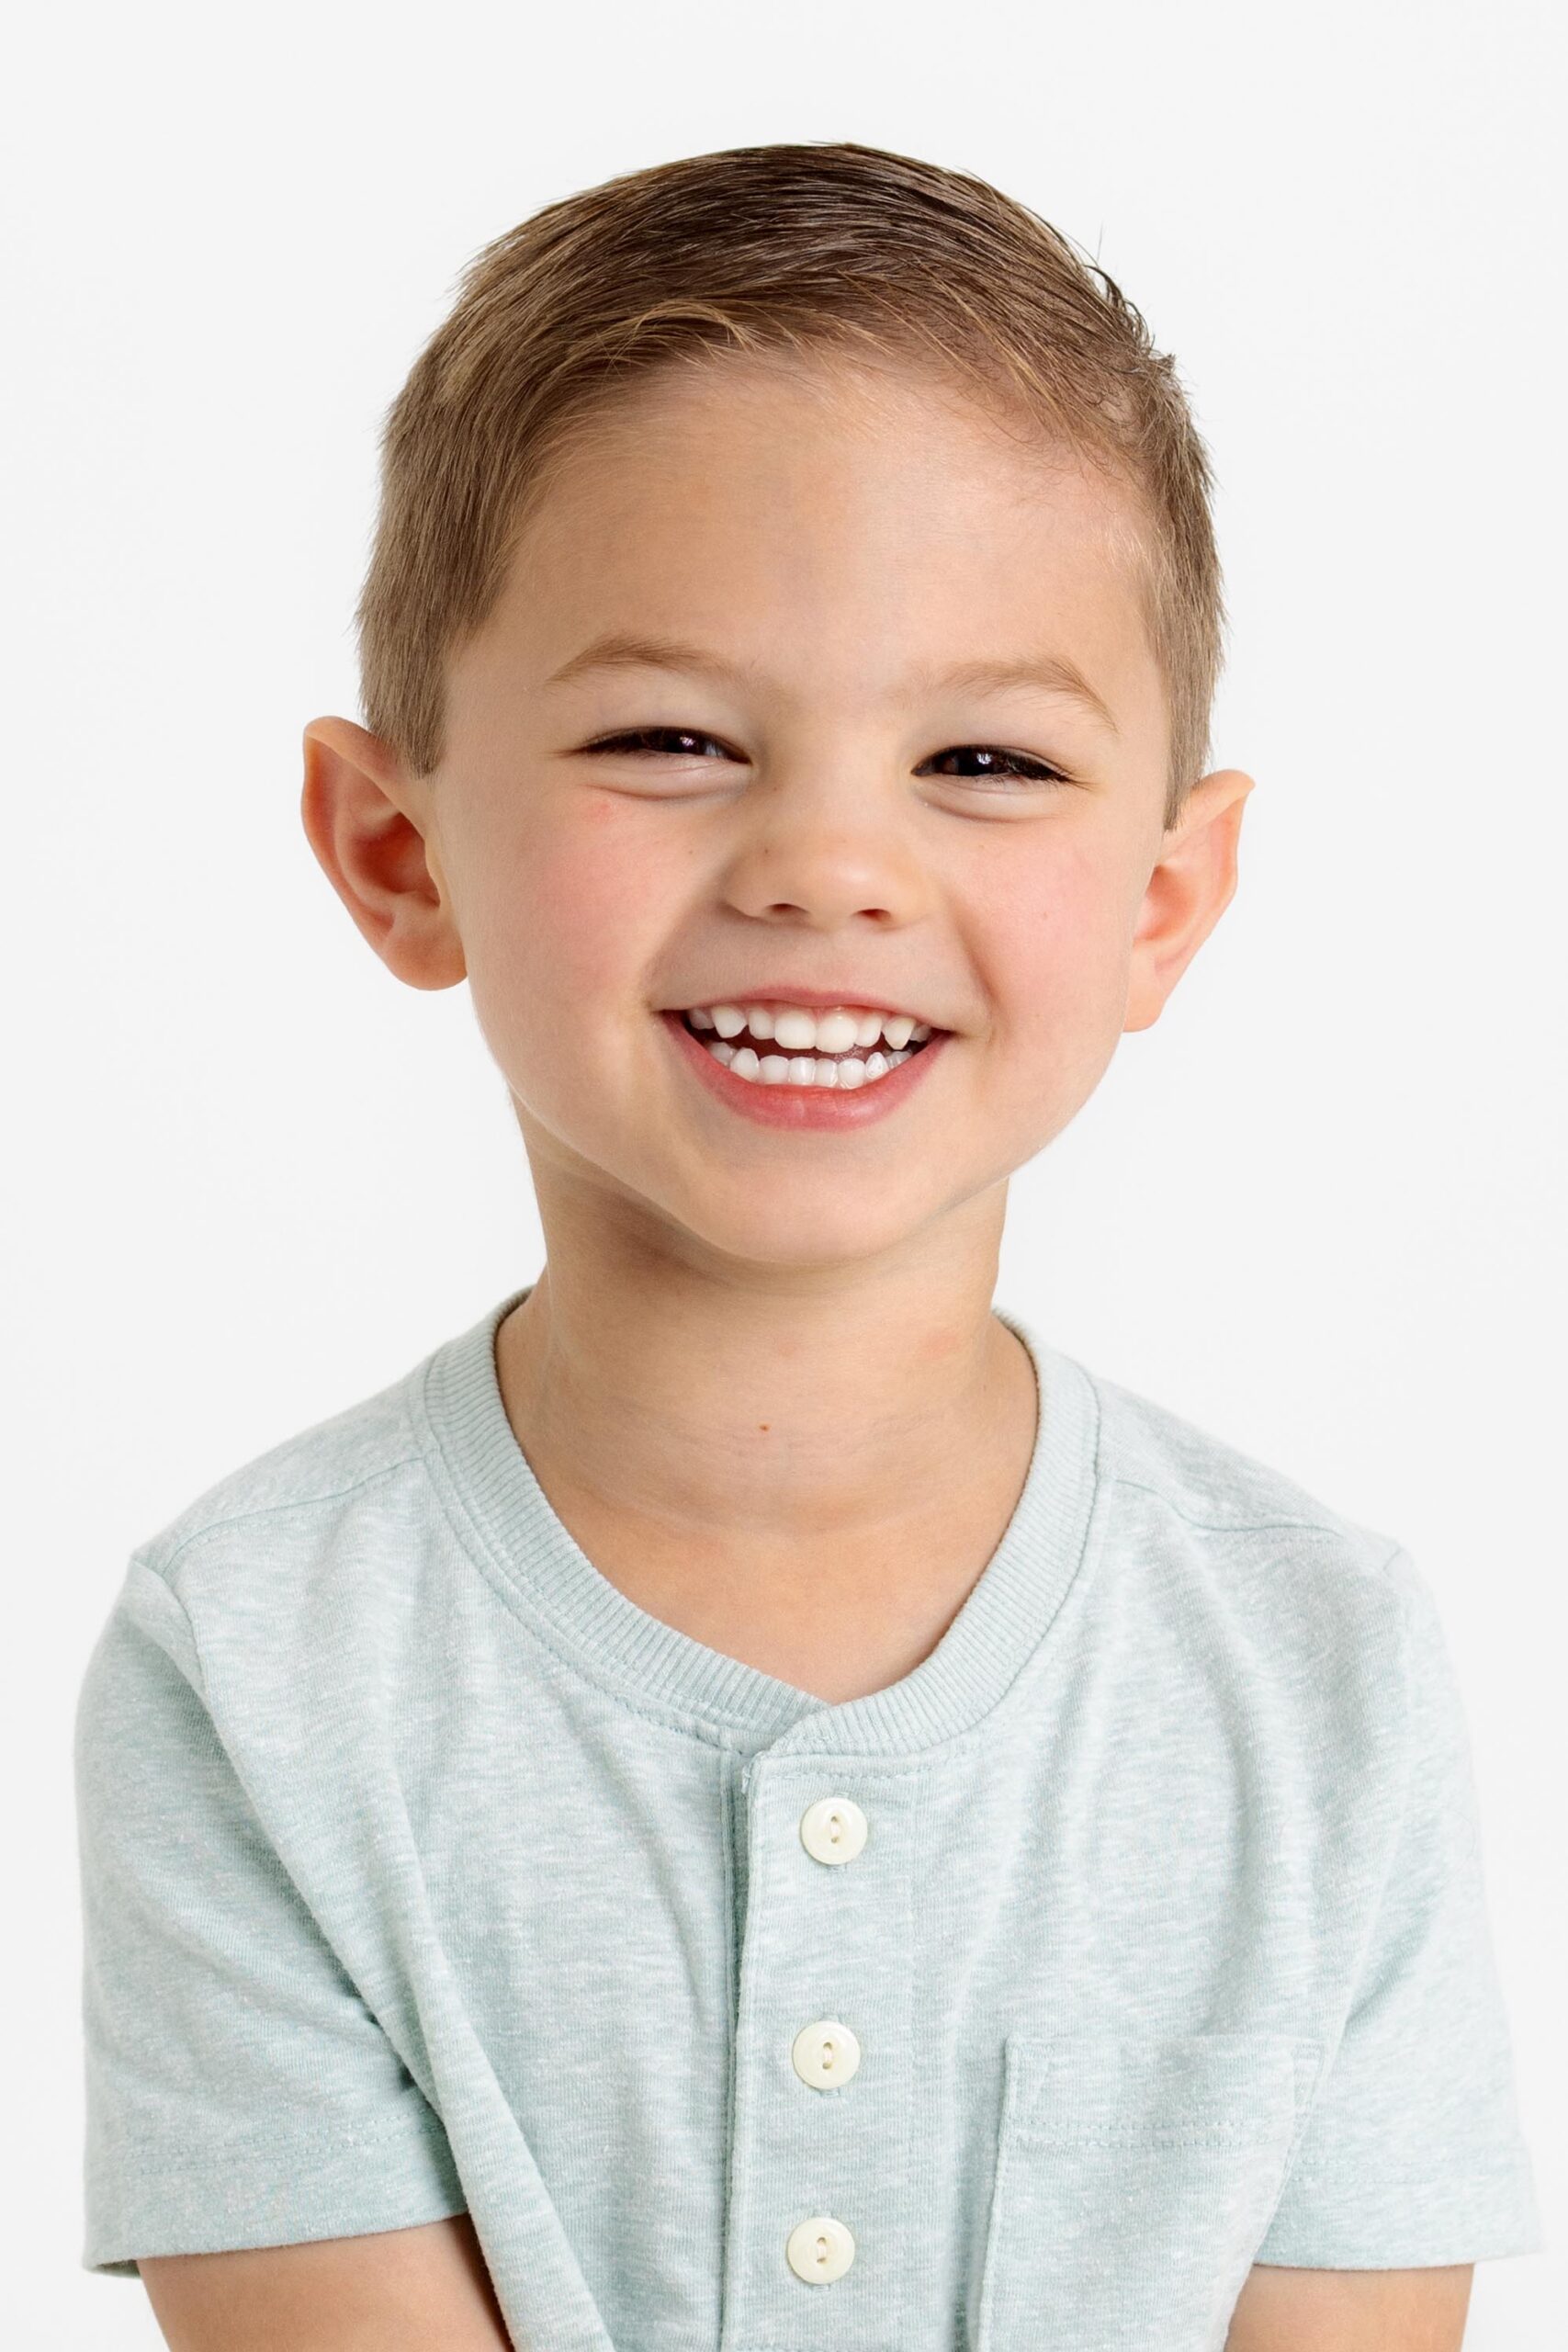 Little boy with blue henley on smiling at camera